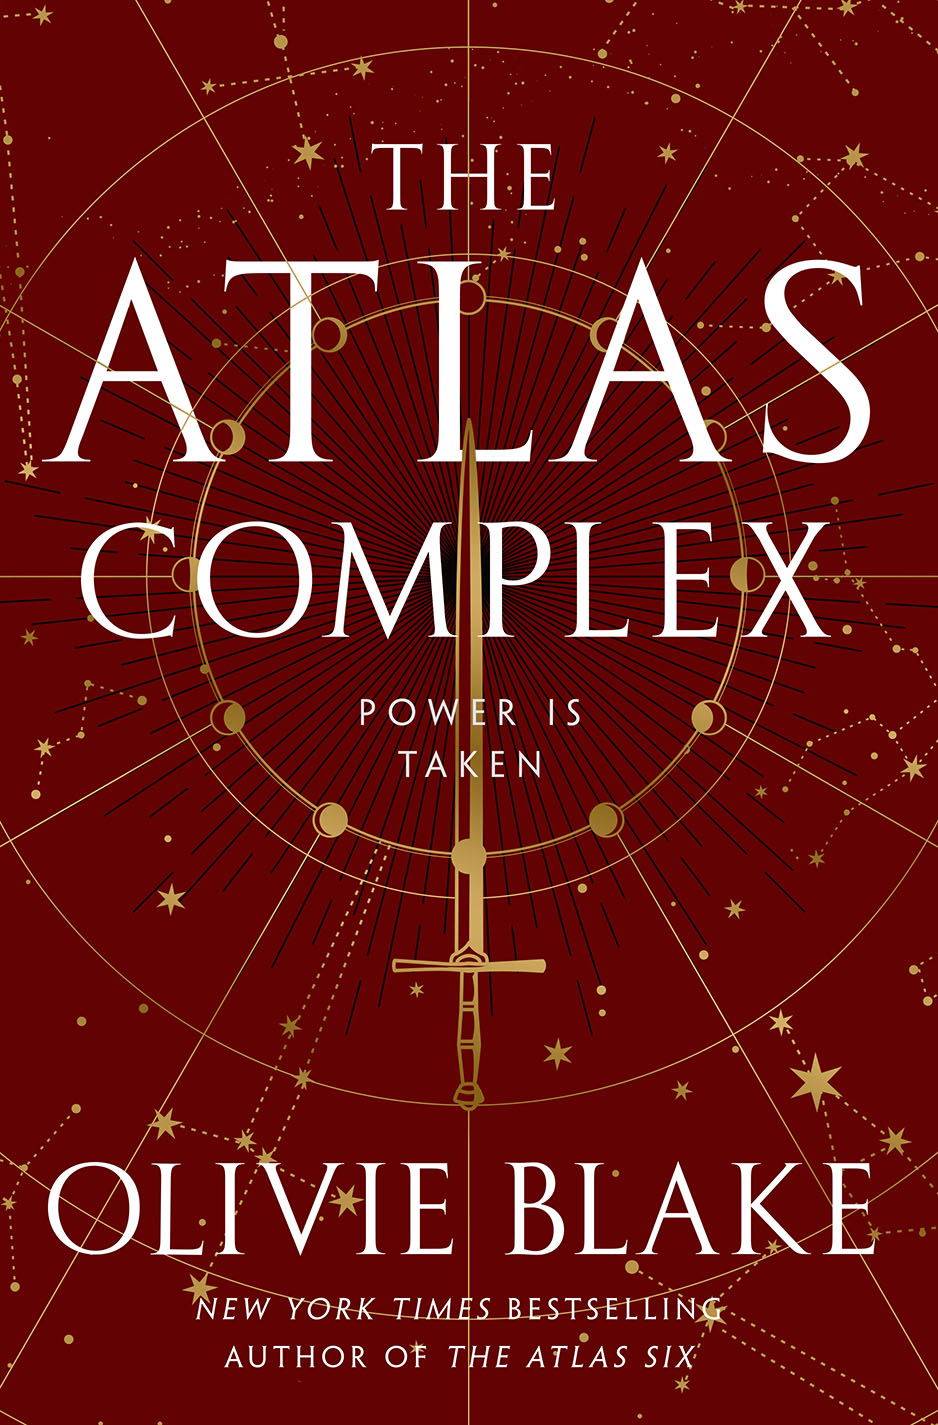 The Atlas Complex by Olivie Blake book cover